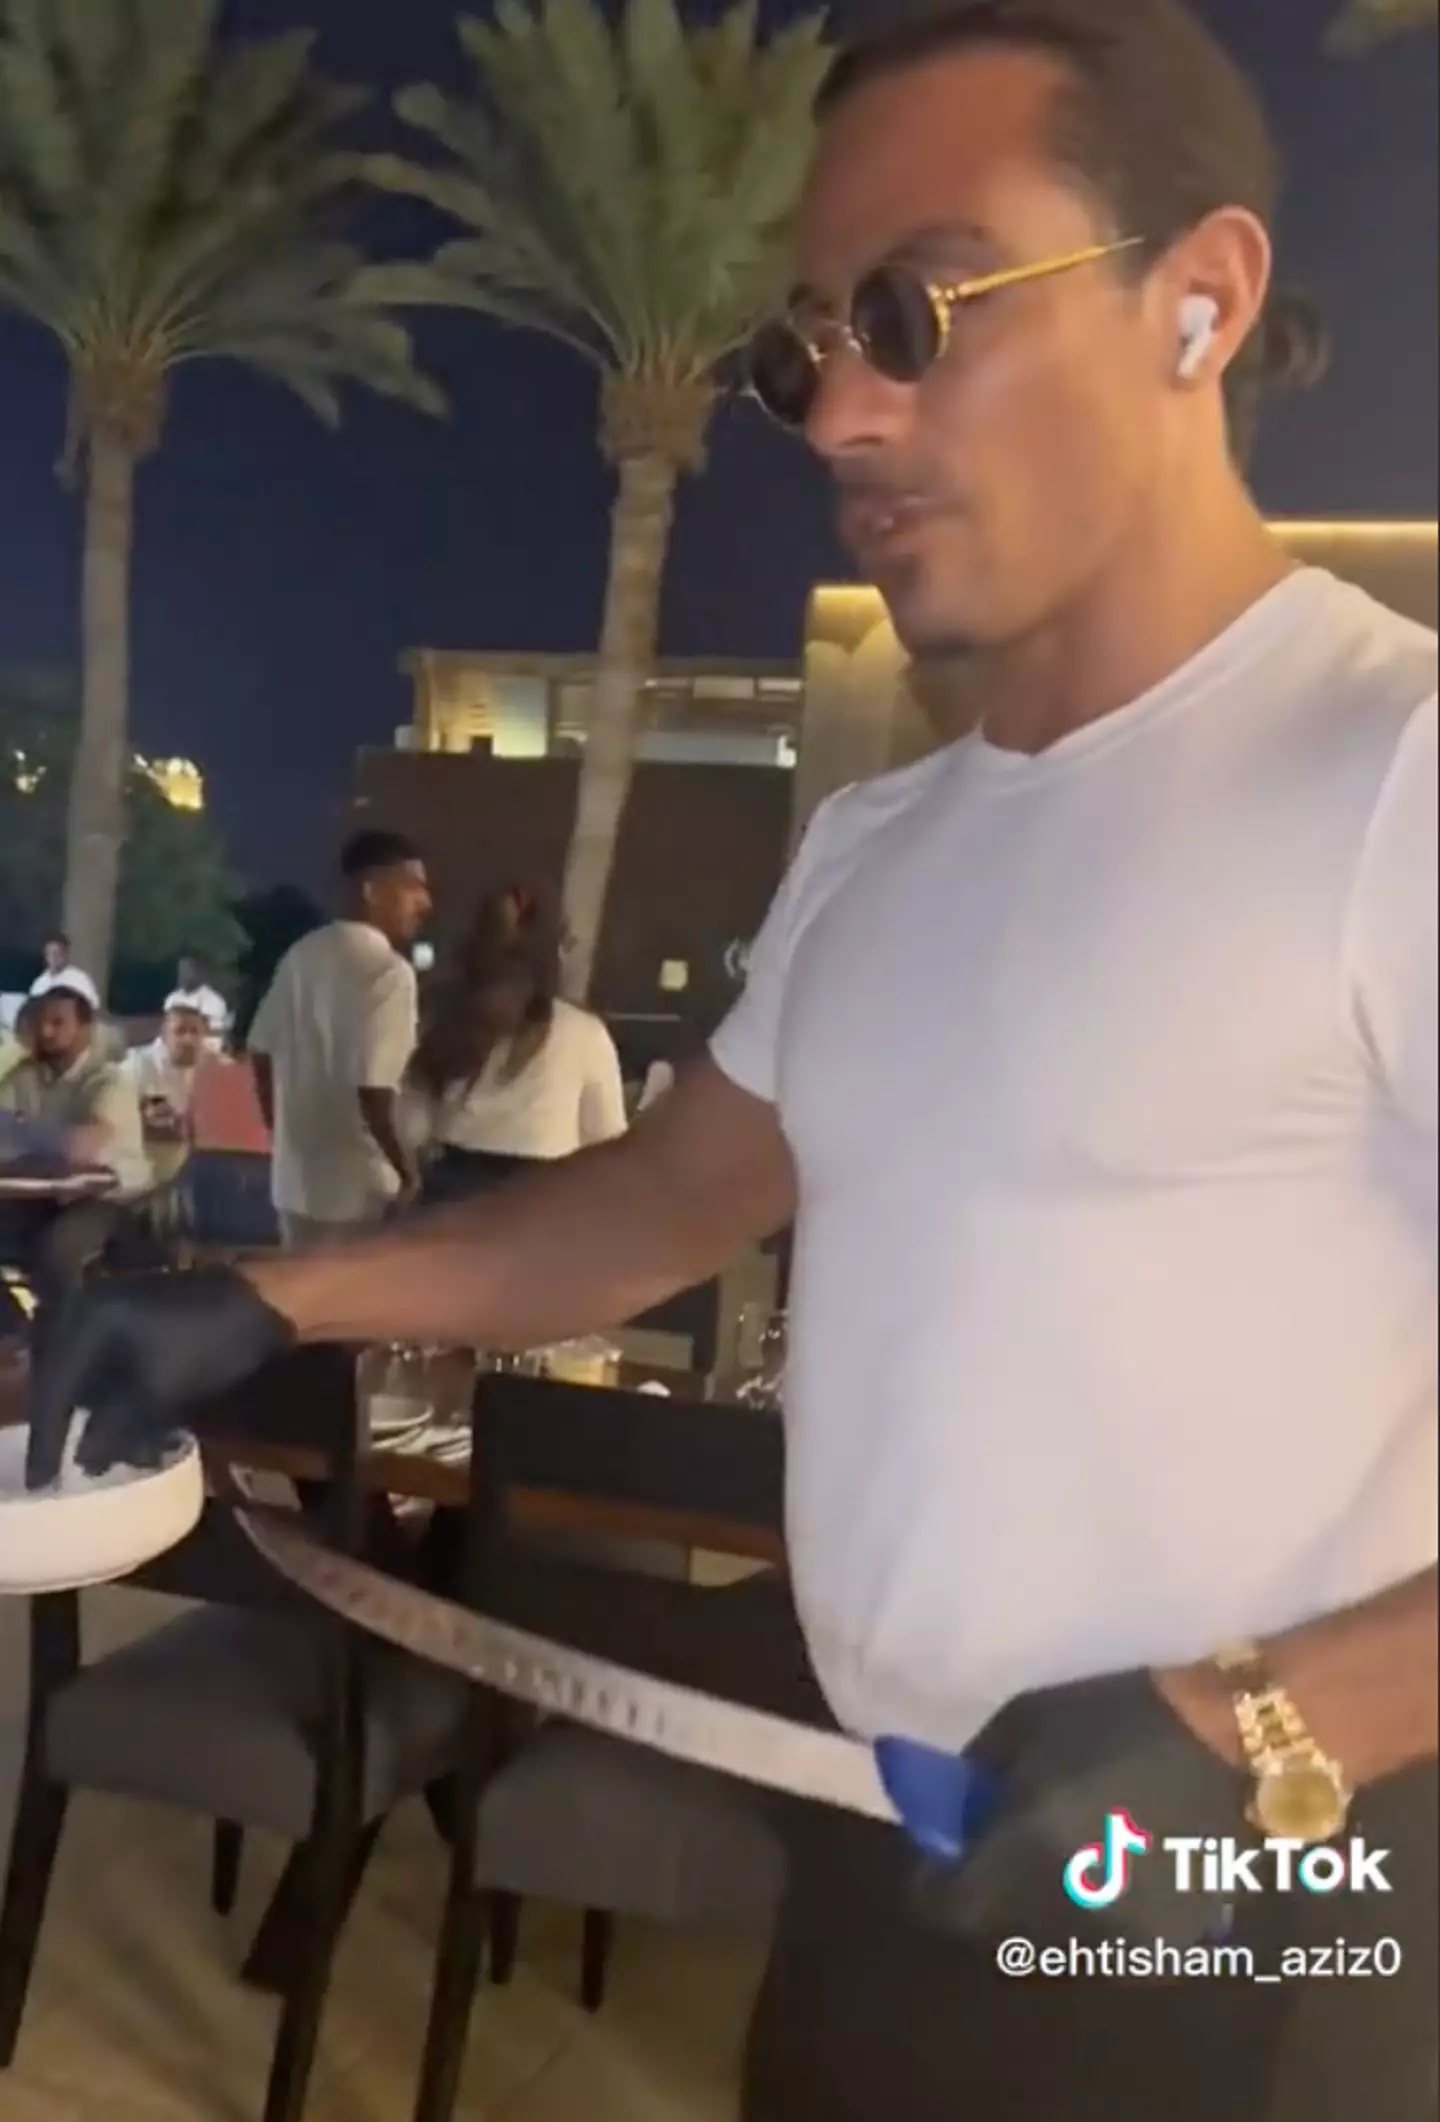 Salt Bae was allegedly talking on his AirPods while serving the table.